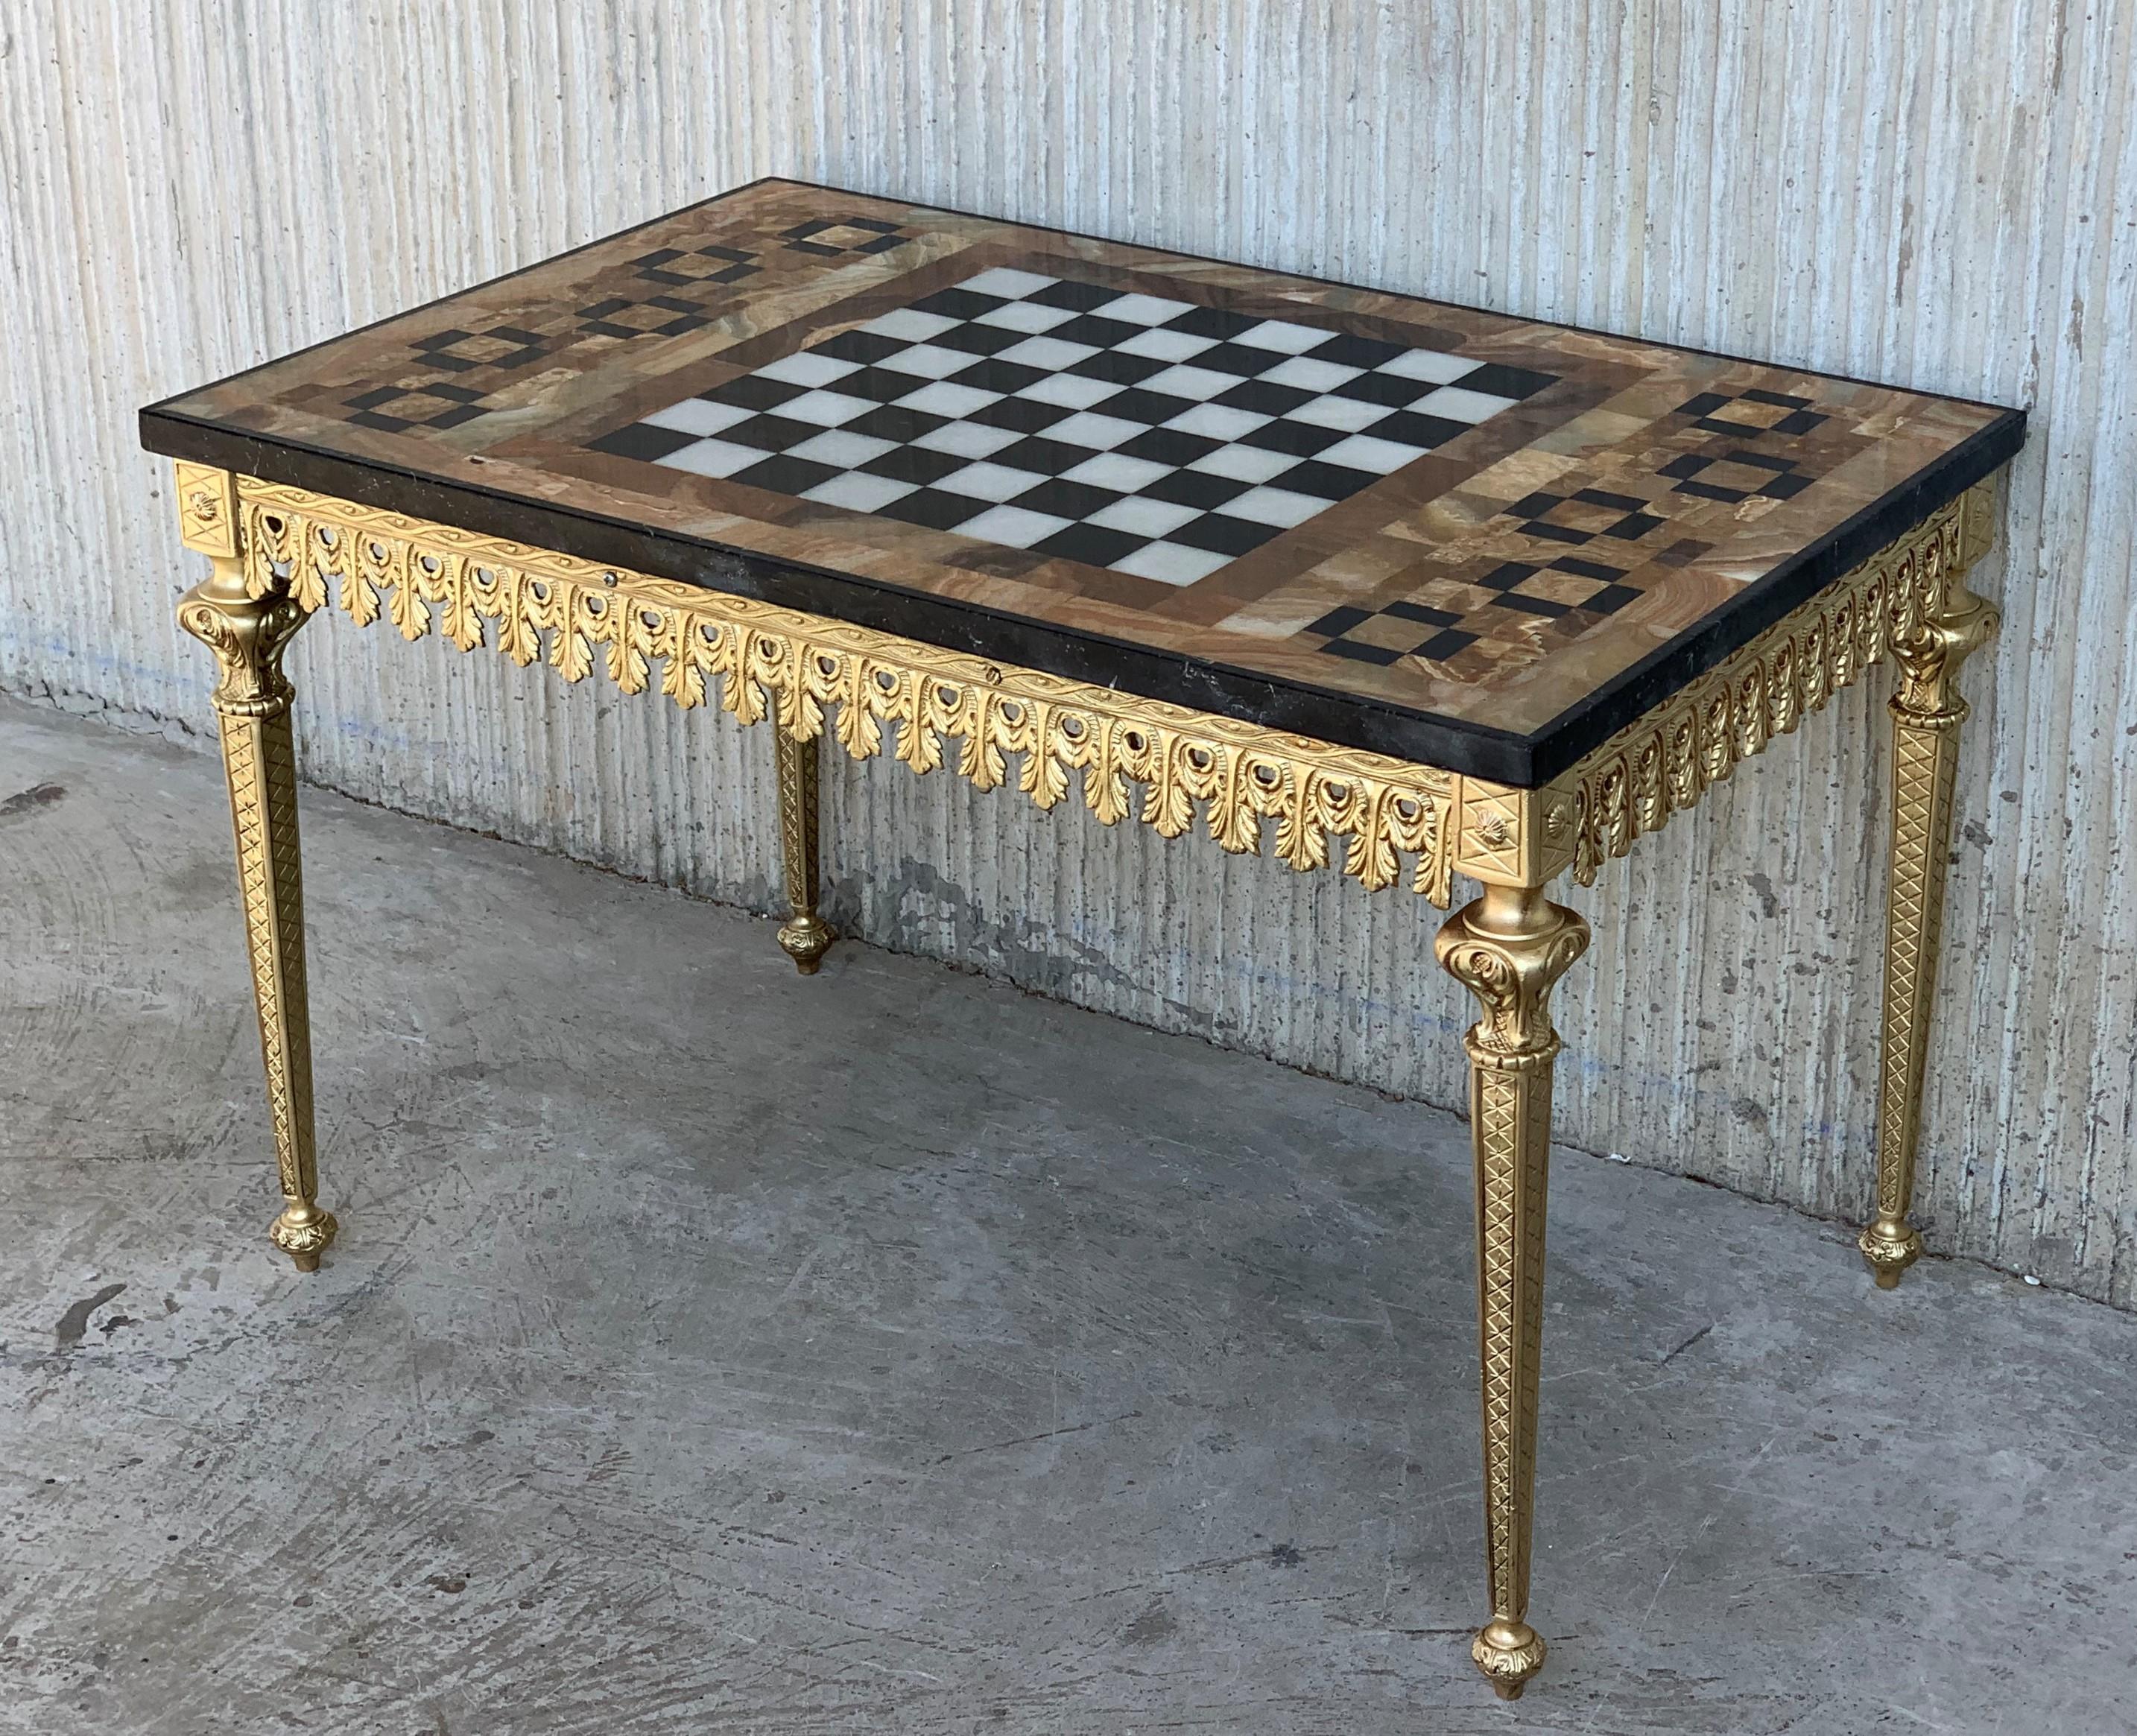 Baroque 20th Century Ormolu Mounted Bronze Game of Chess with Marble and Onix Top Table